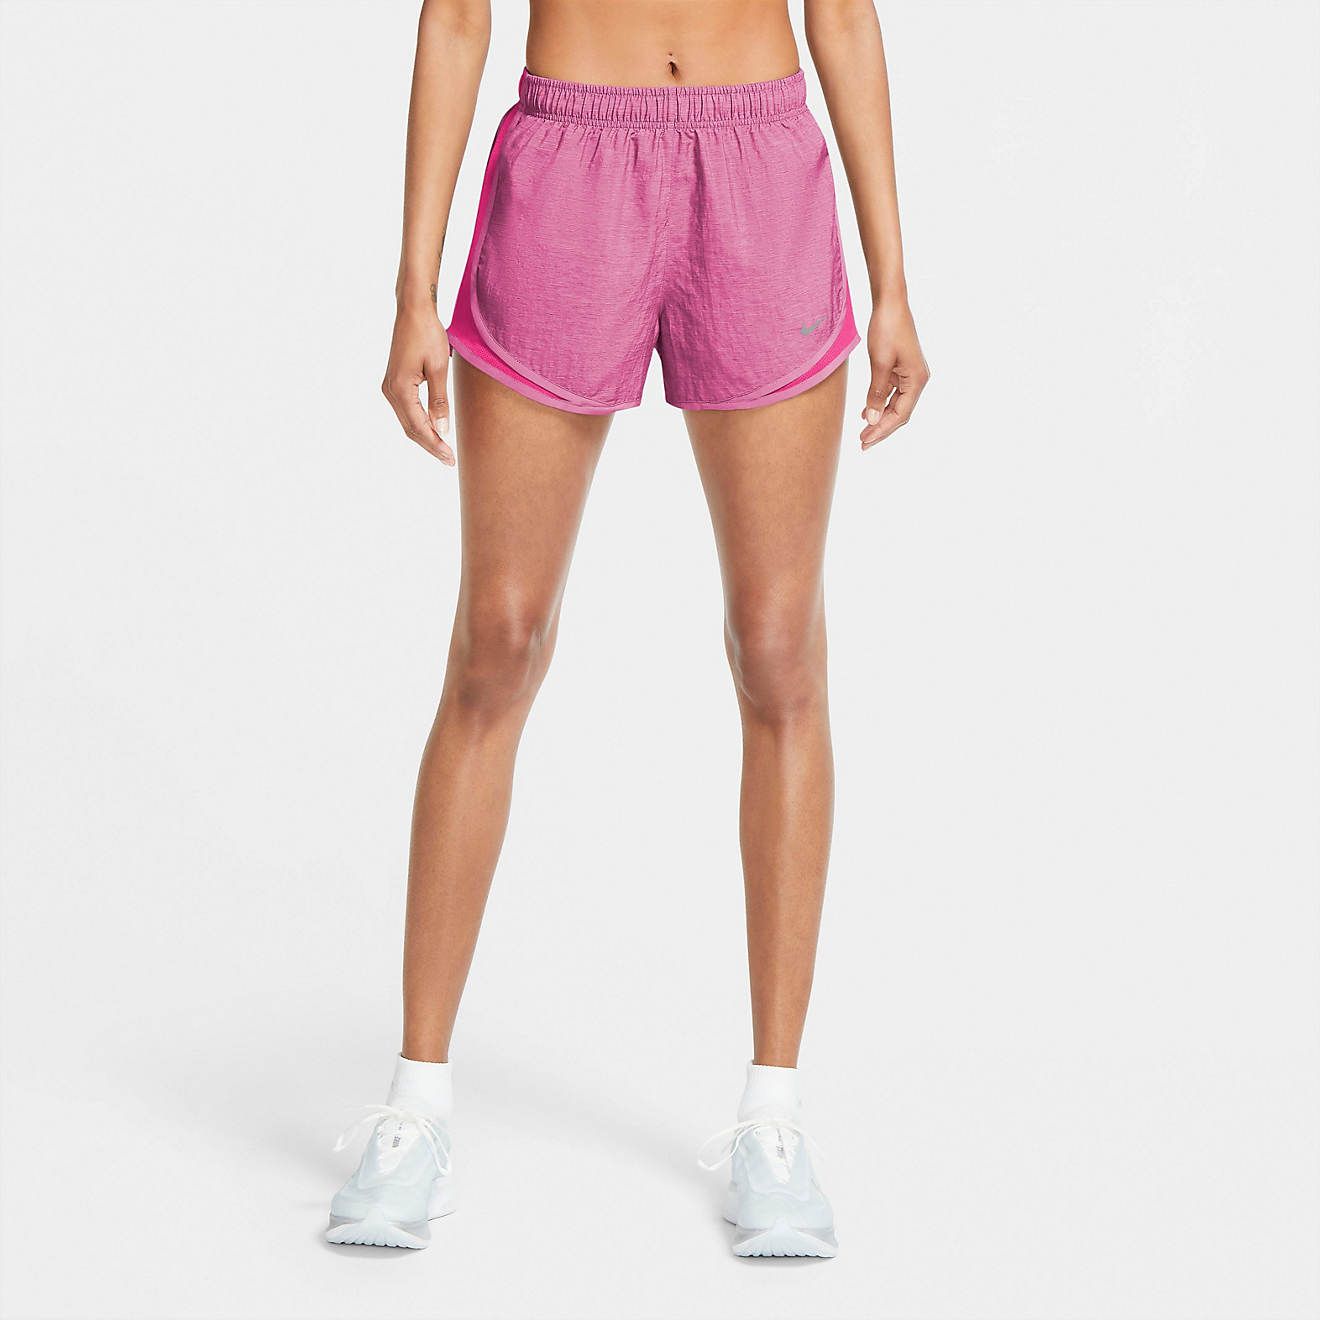 Nike Women's Tempo Running Shorts | Academy Sports + Outdoor Affiliate